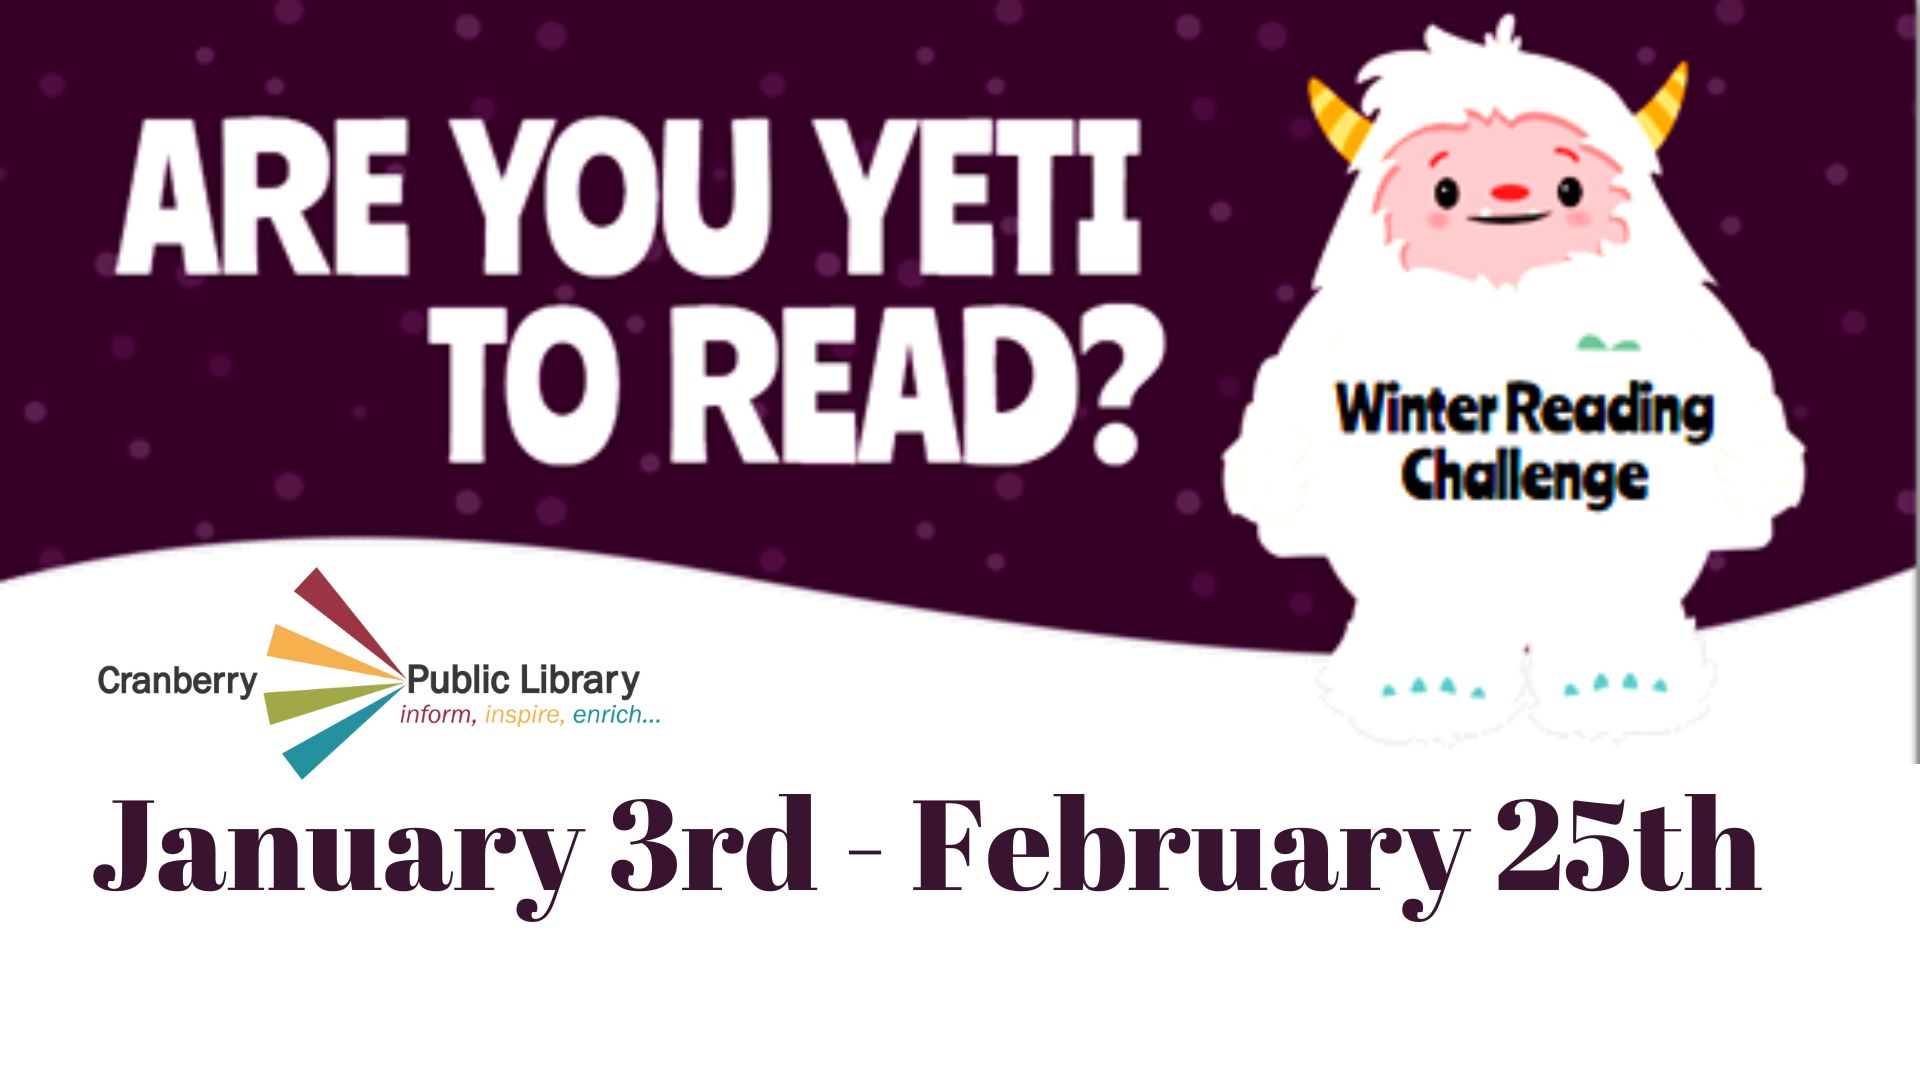 Flyer for Winter Reading Challenge with a Cartoon Yeti